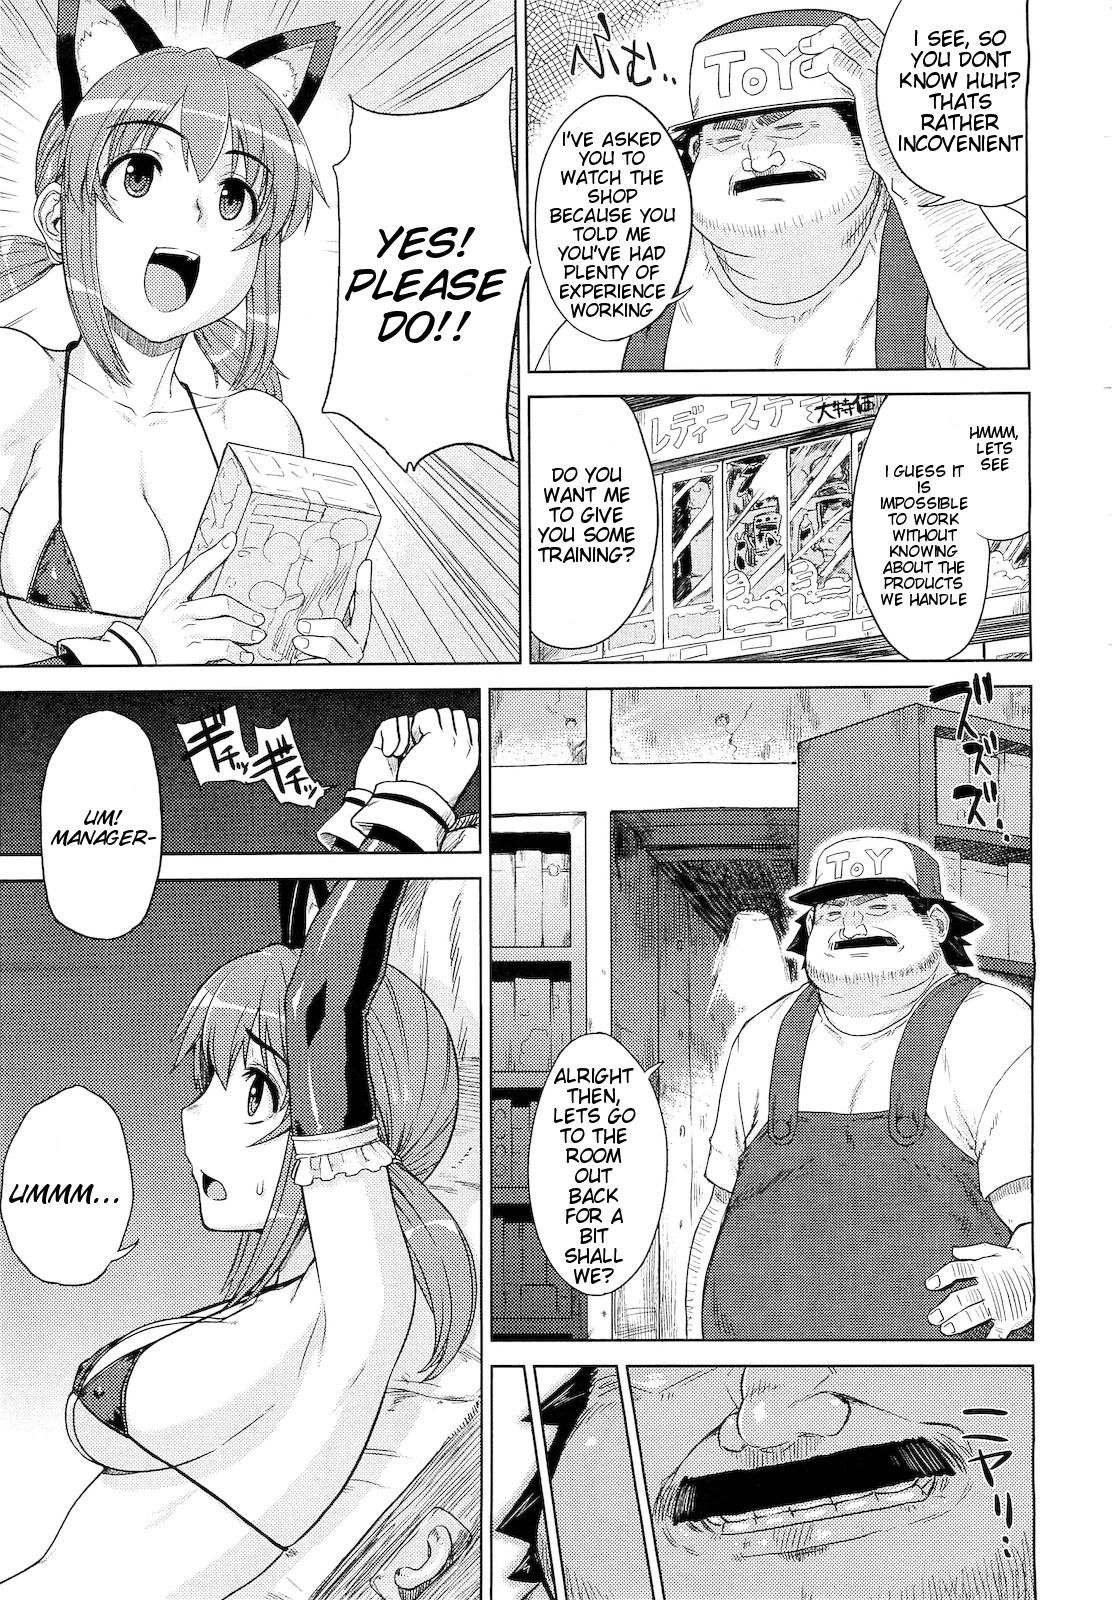 Interracial Sex ◯◯ no Omochaya-san | A Questionable Toy Store Class Room - Page 5